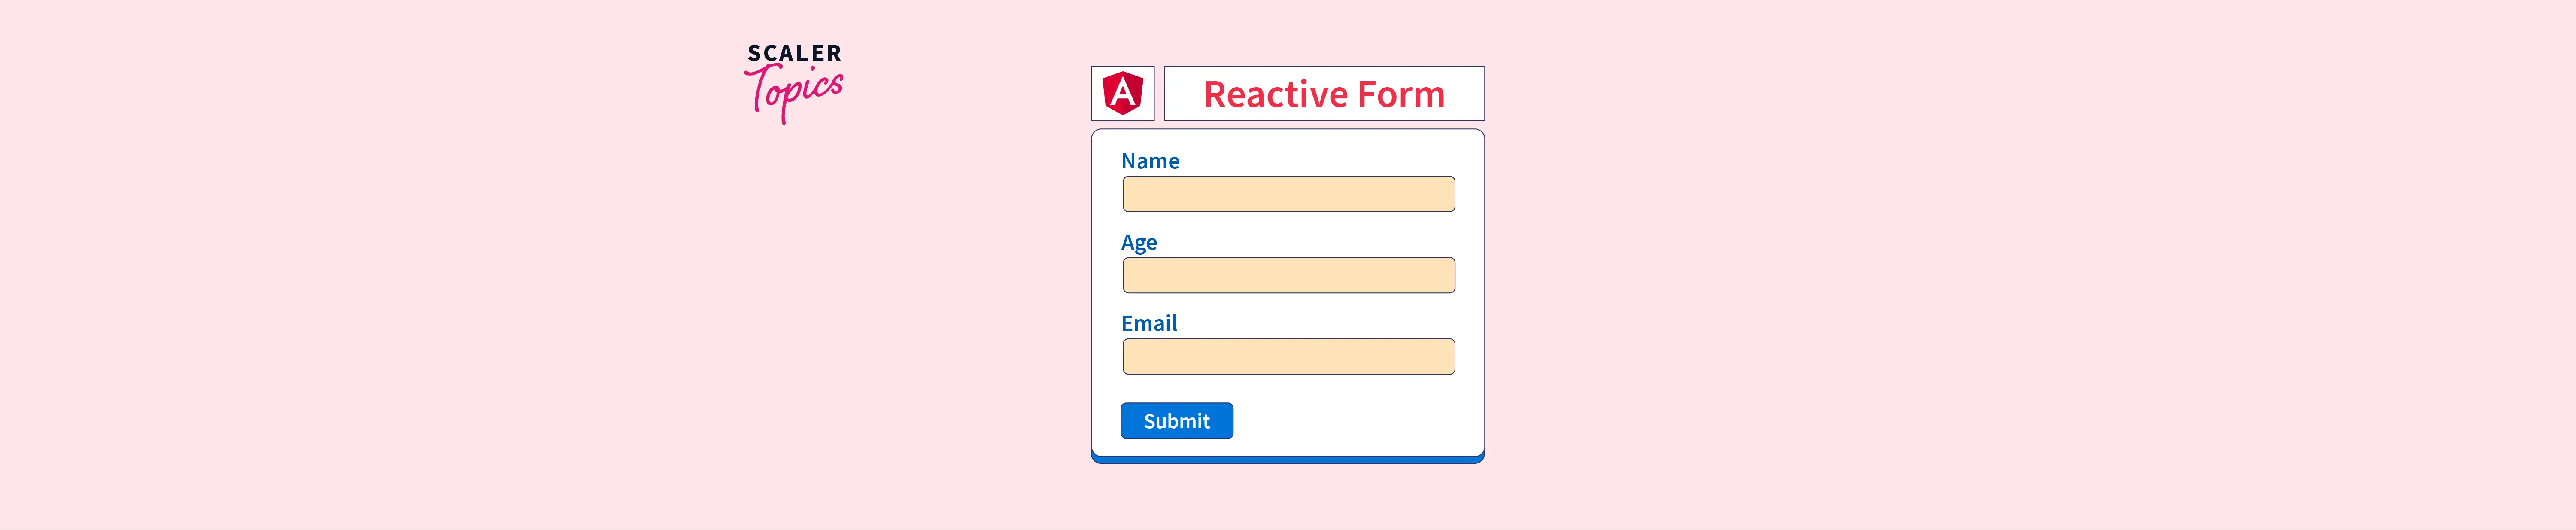 reactive-form-validations-in-angular-scaler-topics